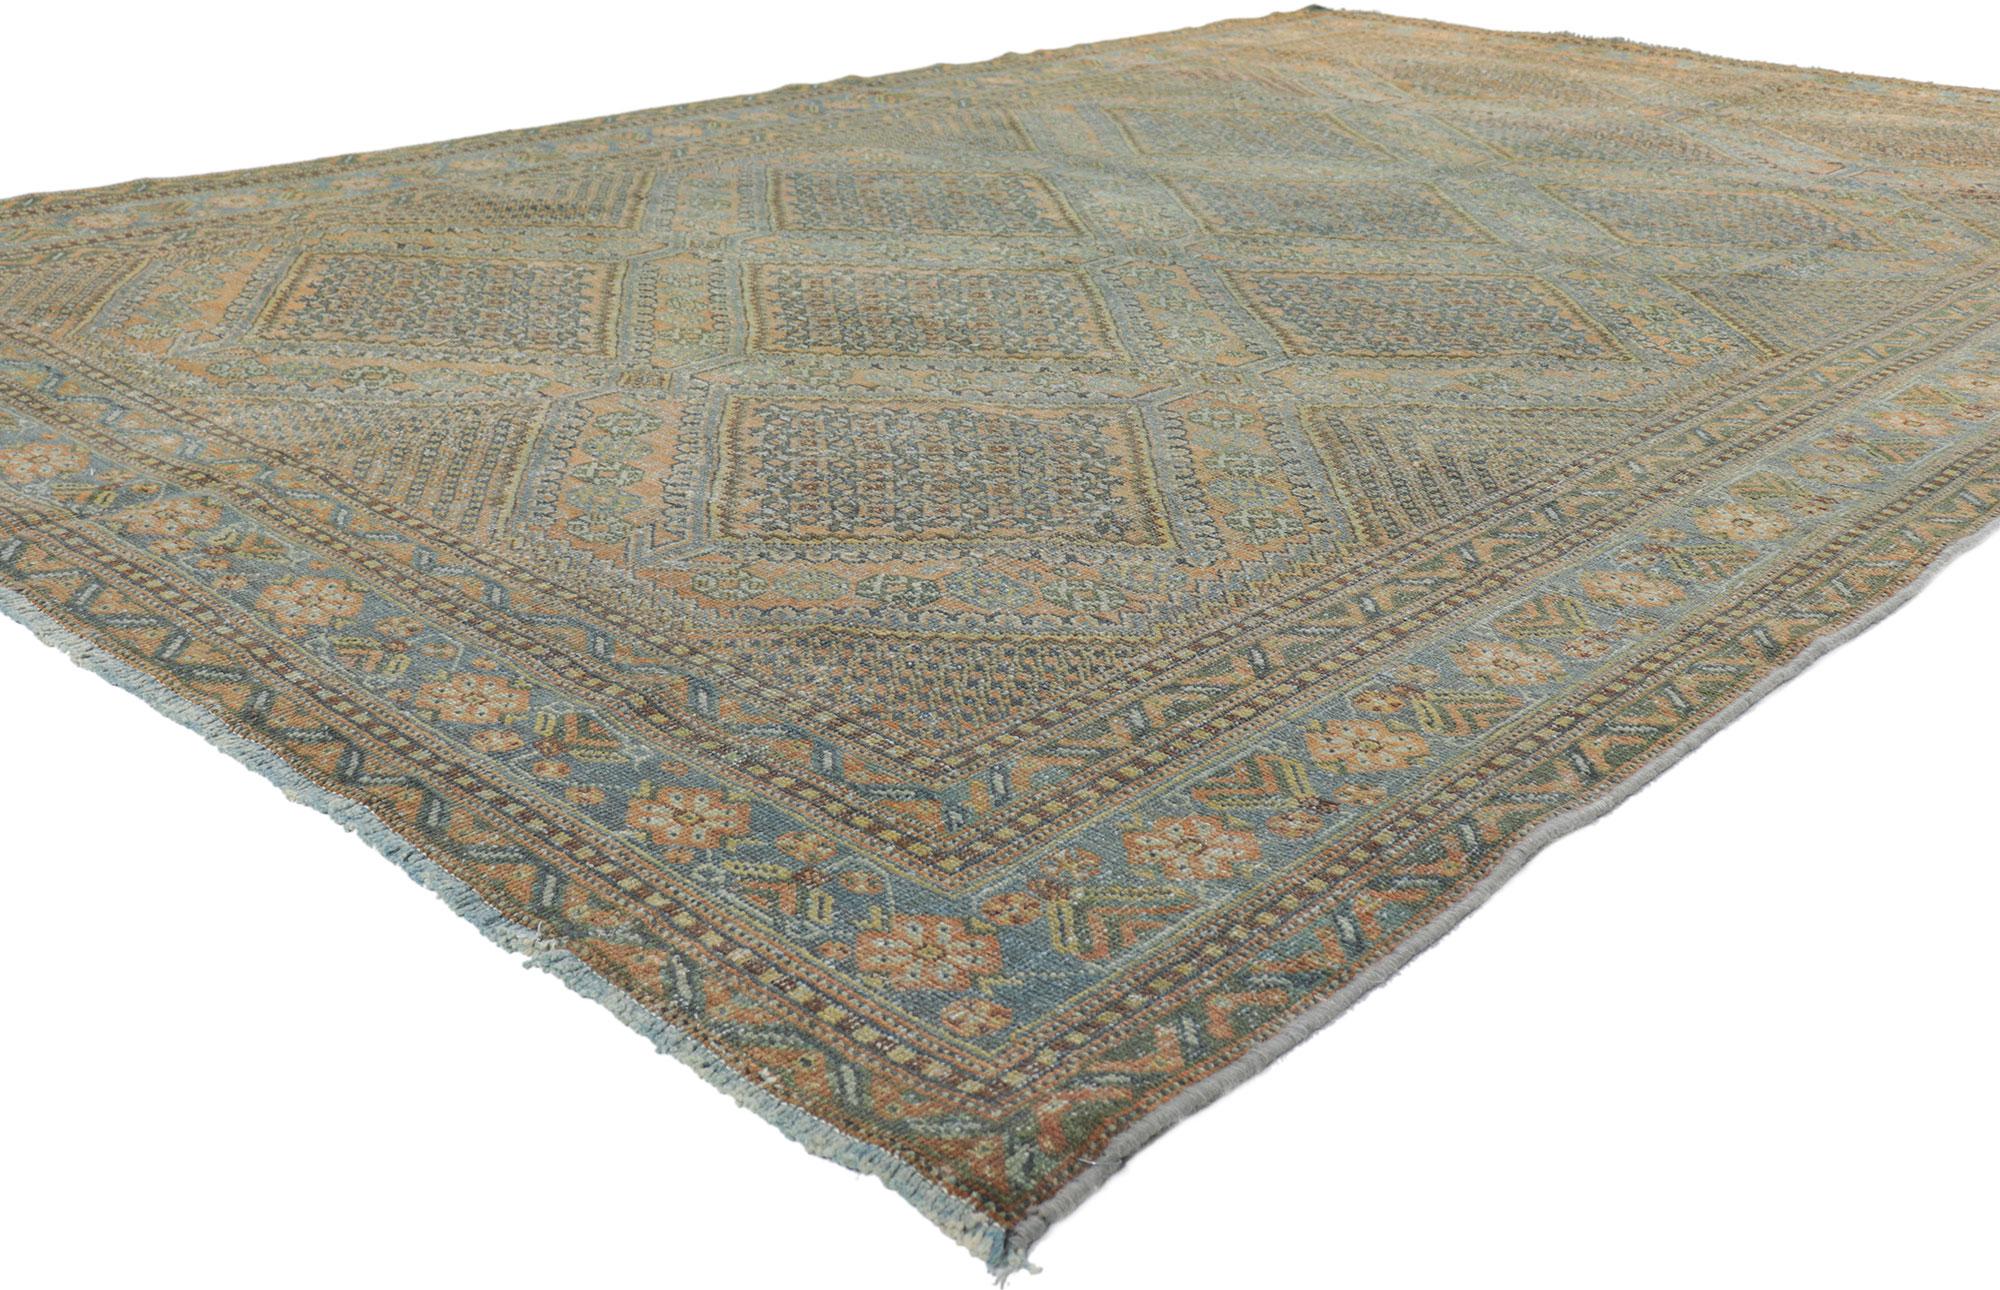 ?61188 Vintage Persian Ardabil rug, 07'01 x 10'10. With its rustic sensibility, incredible detail and texture, this hand knotted wool vintage Persian Ardabil rug is a capitvating vision of woven beauty. The traditional style and earthy colorway